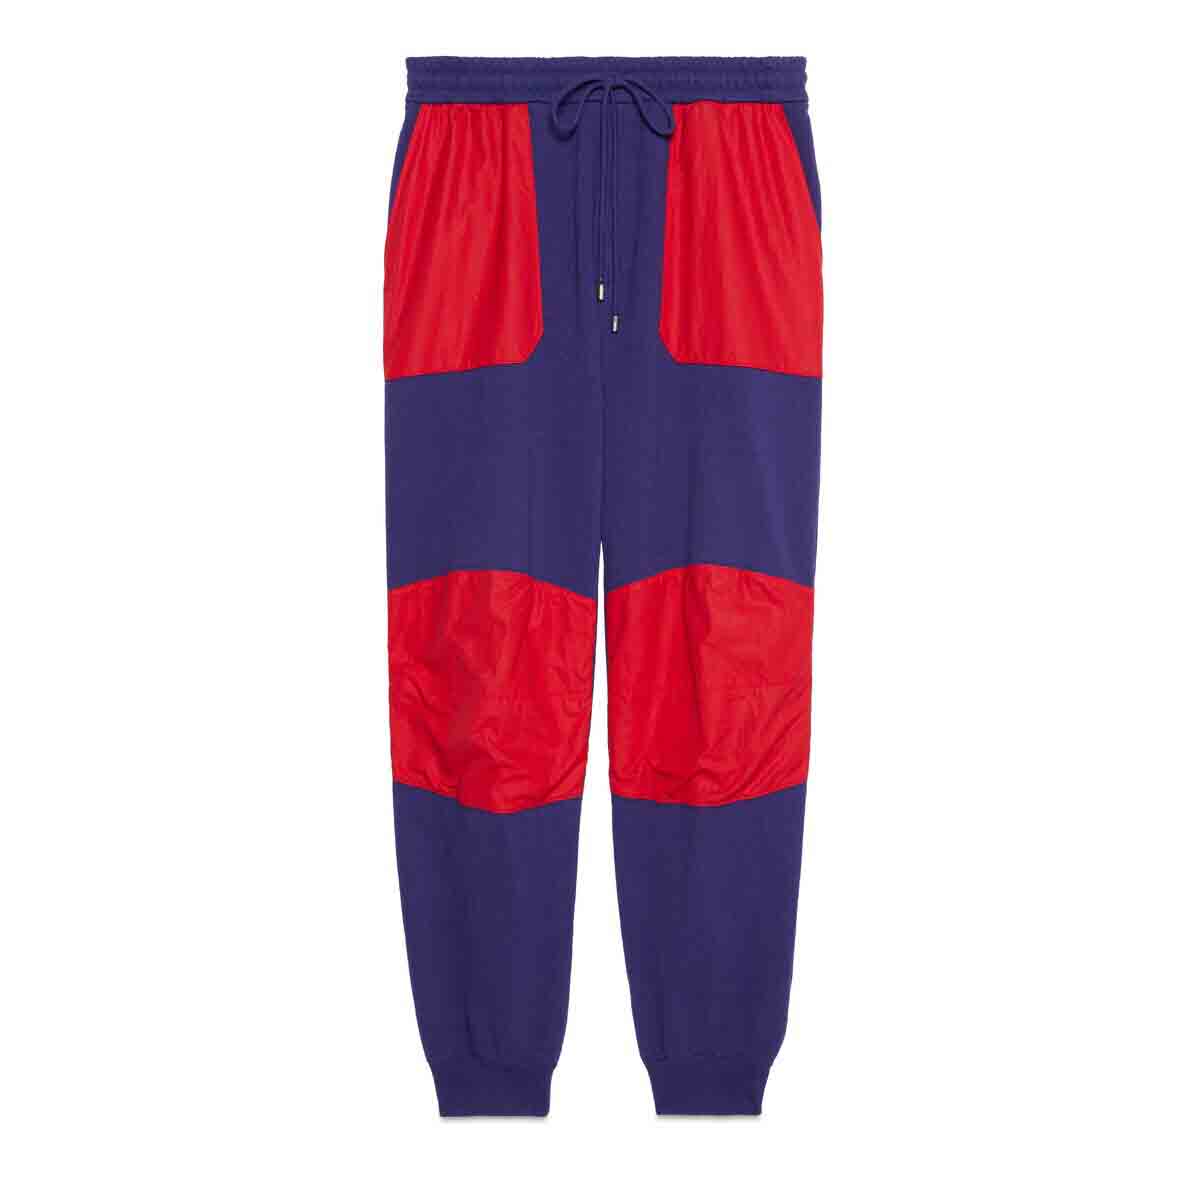 Gucci x The North Face Jogging Pant Blue/Red Men's - FW21 - US